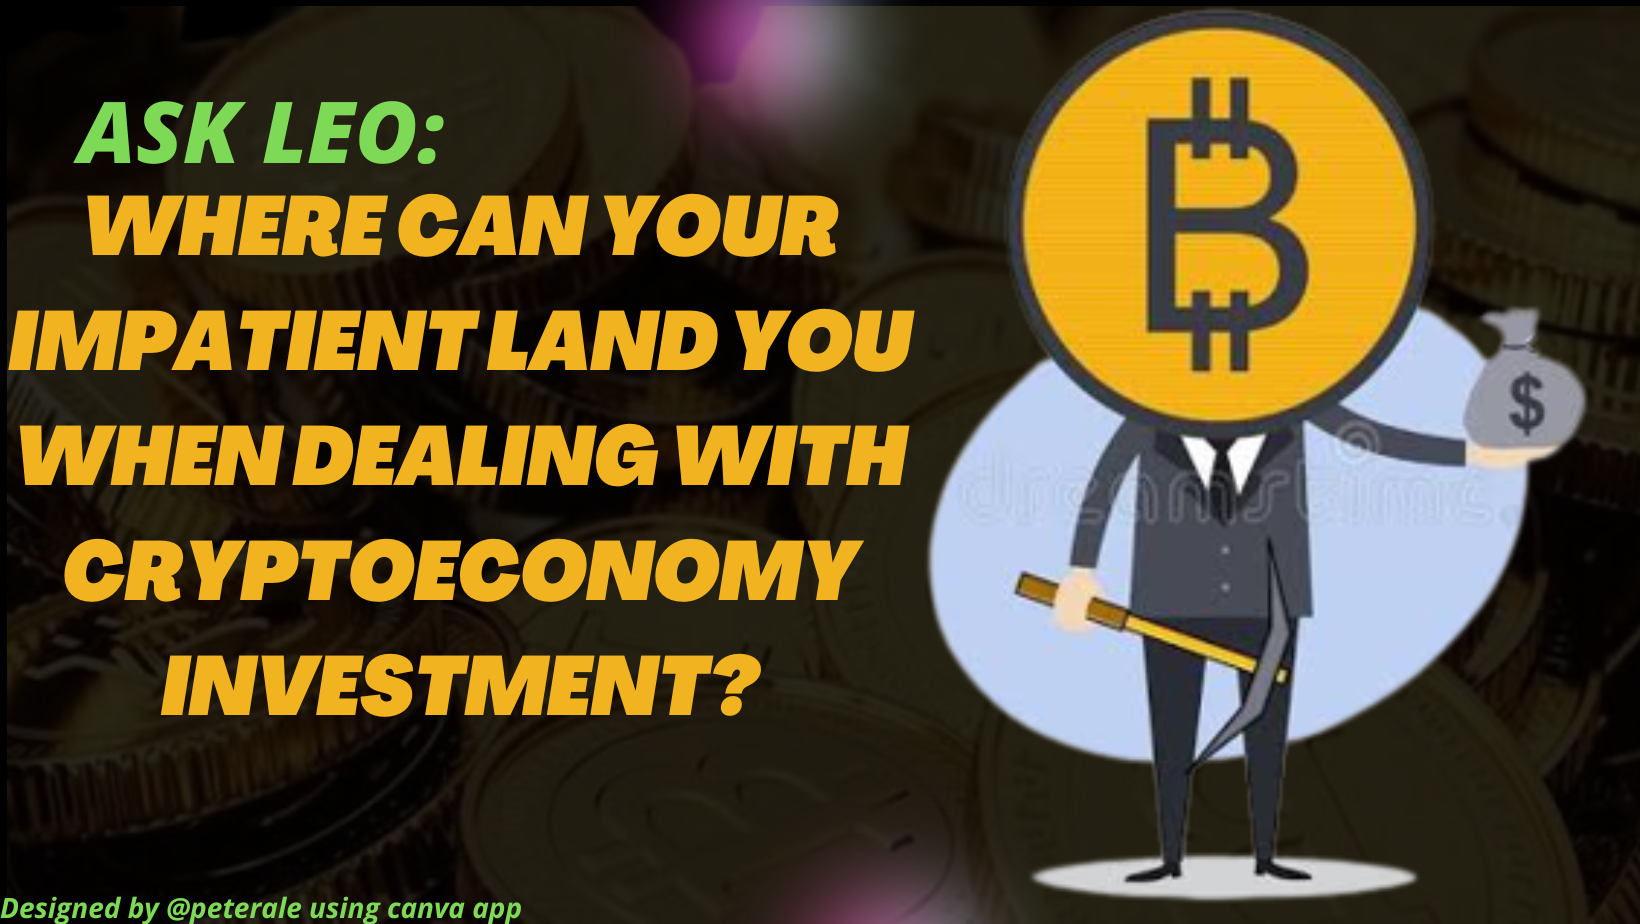 @peterale/ask-leo-where-can-your-impatient-land-you-when-dealing-with-cryptoeconomy-investment